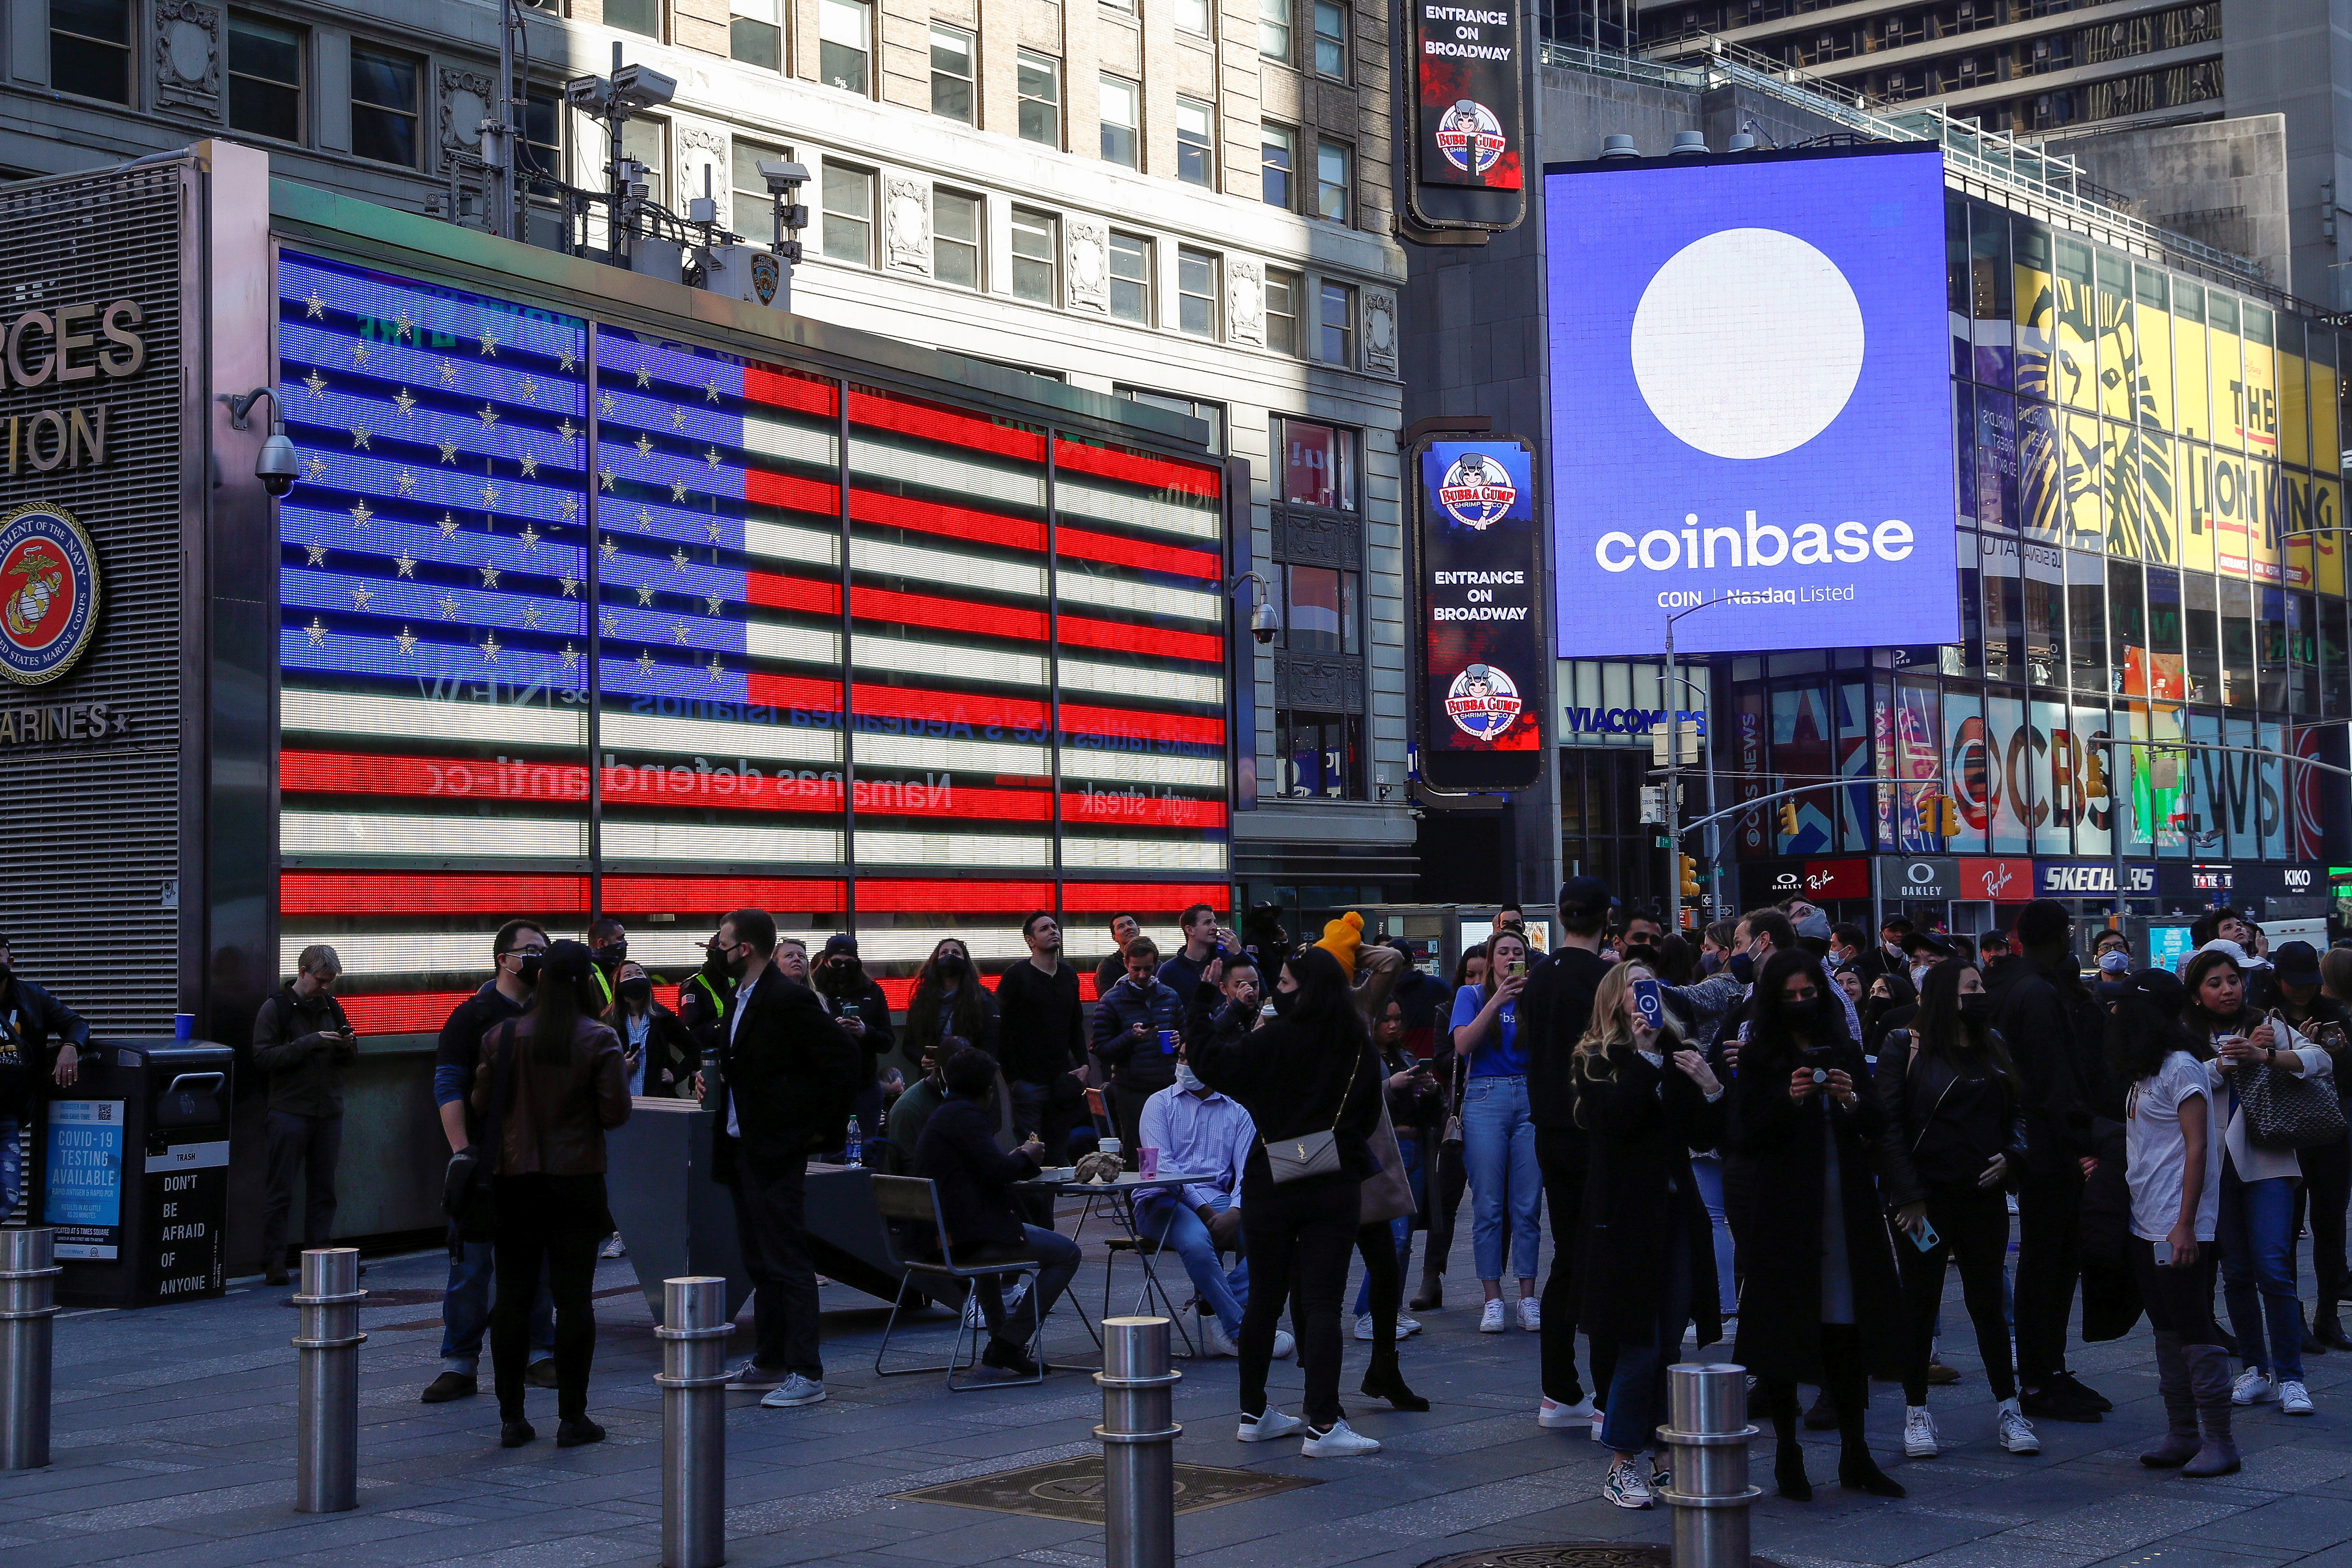 Employees of Coinbase Global Inc, the biggest U.S. cryptocurrency exchange, watch as their listing is displayed on the Nasdaq MarketSite jumbotron at Times Square in New York